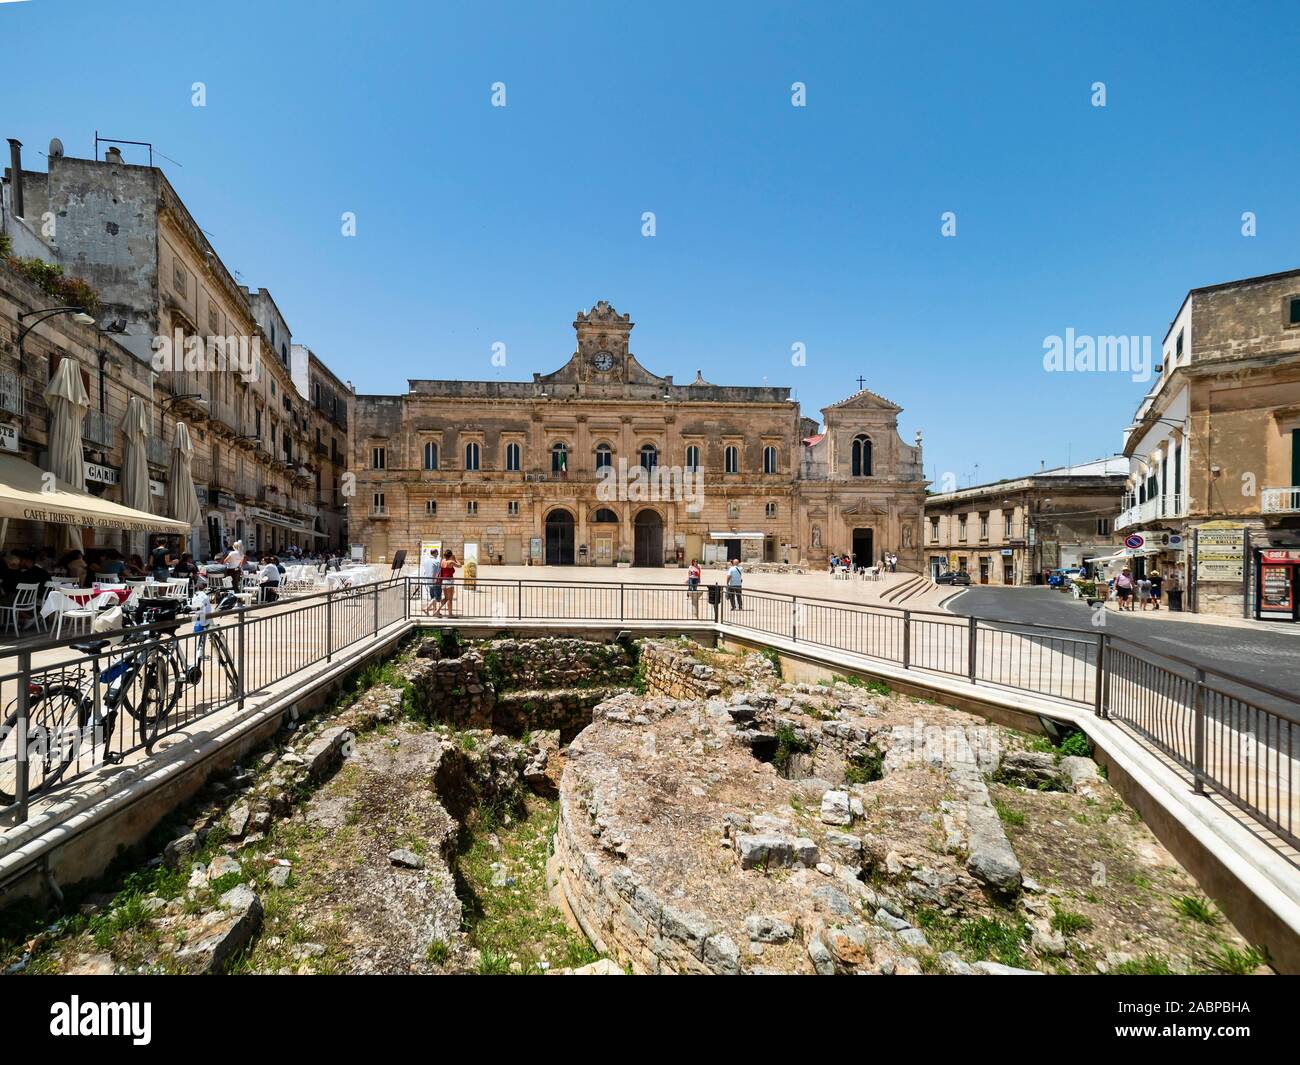 Historical ruins in the old town, mountain village, Ostuni, Apulia, Italy Stock Photo